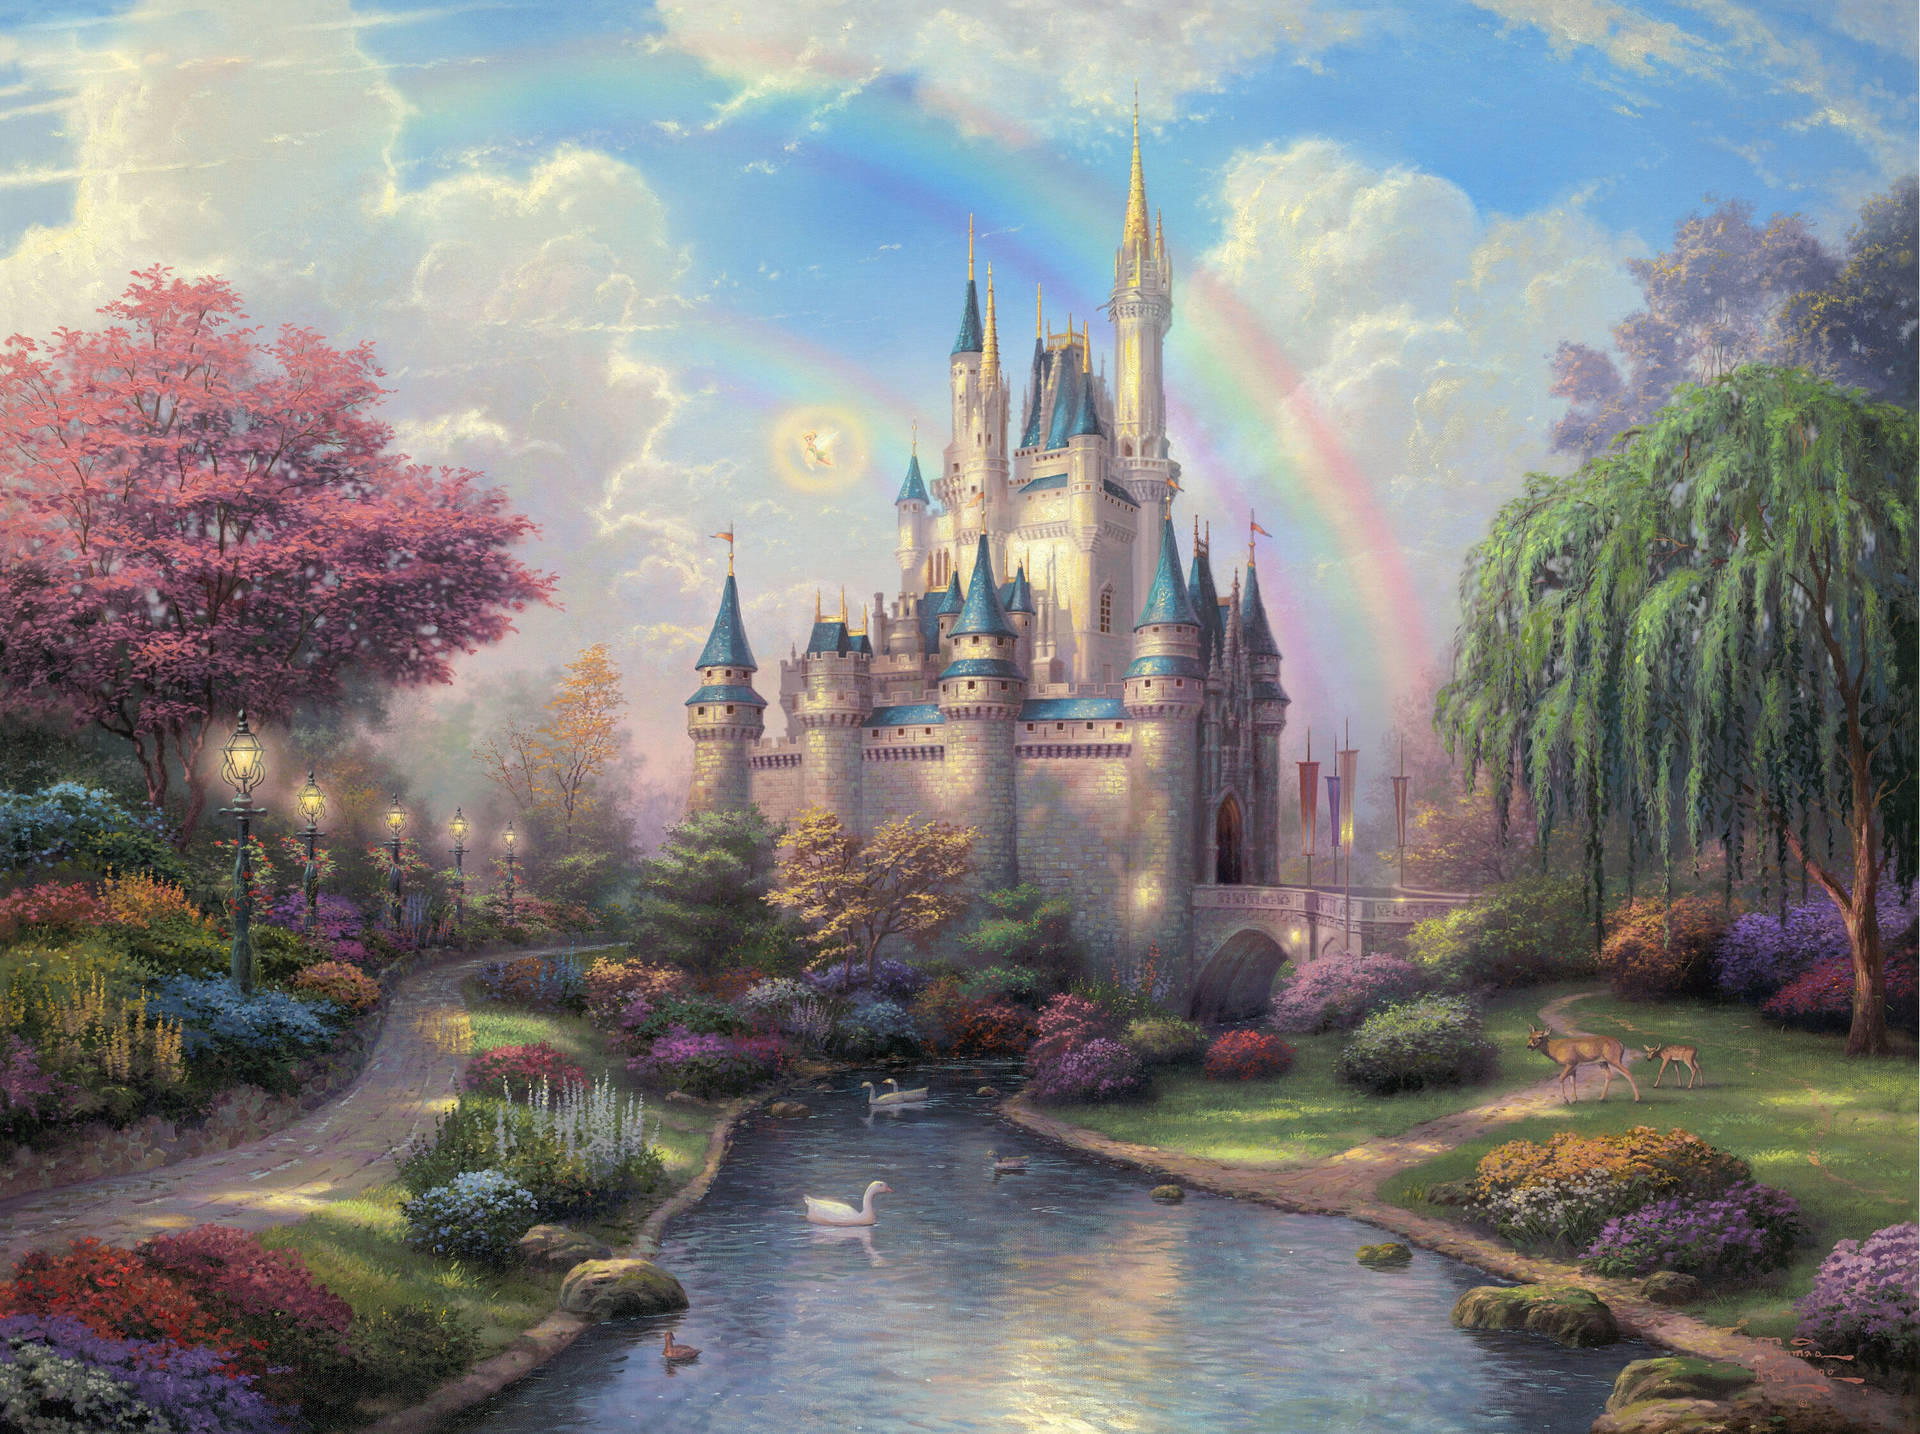 Escape to a magical world of adventure with this beautiful children's fairy painting of Disneyland Park. Wallpaper